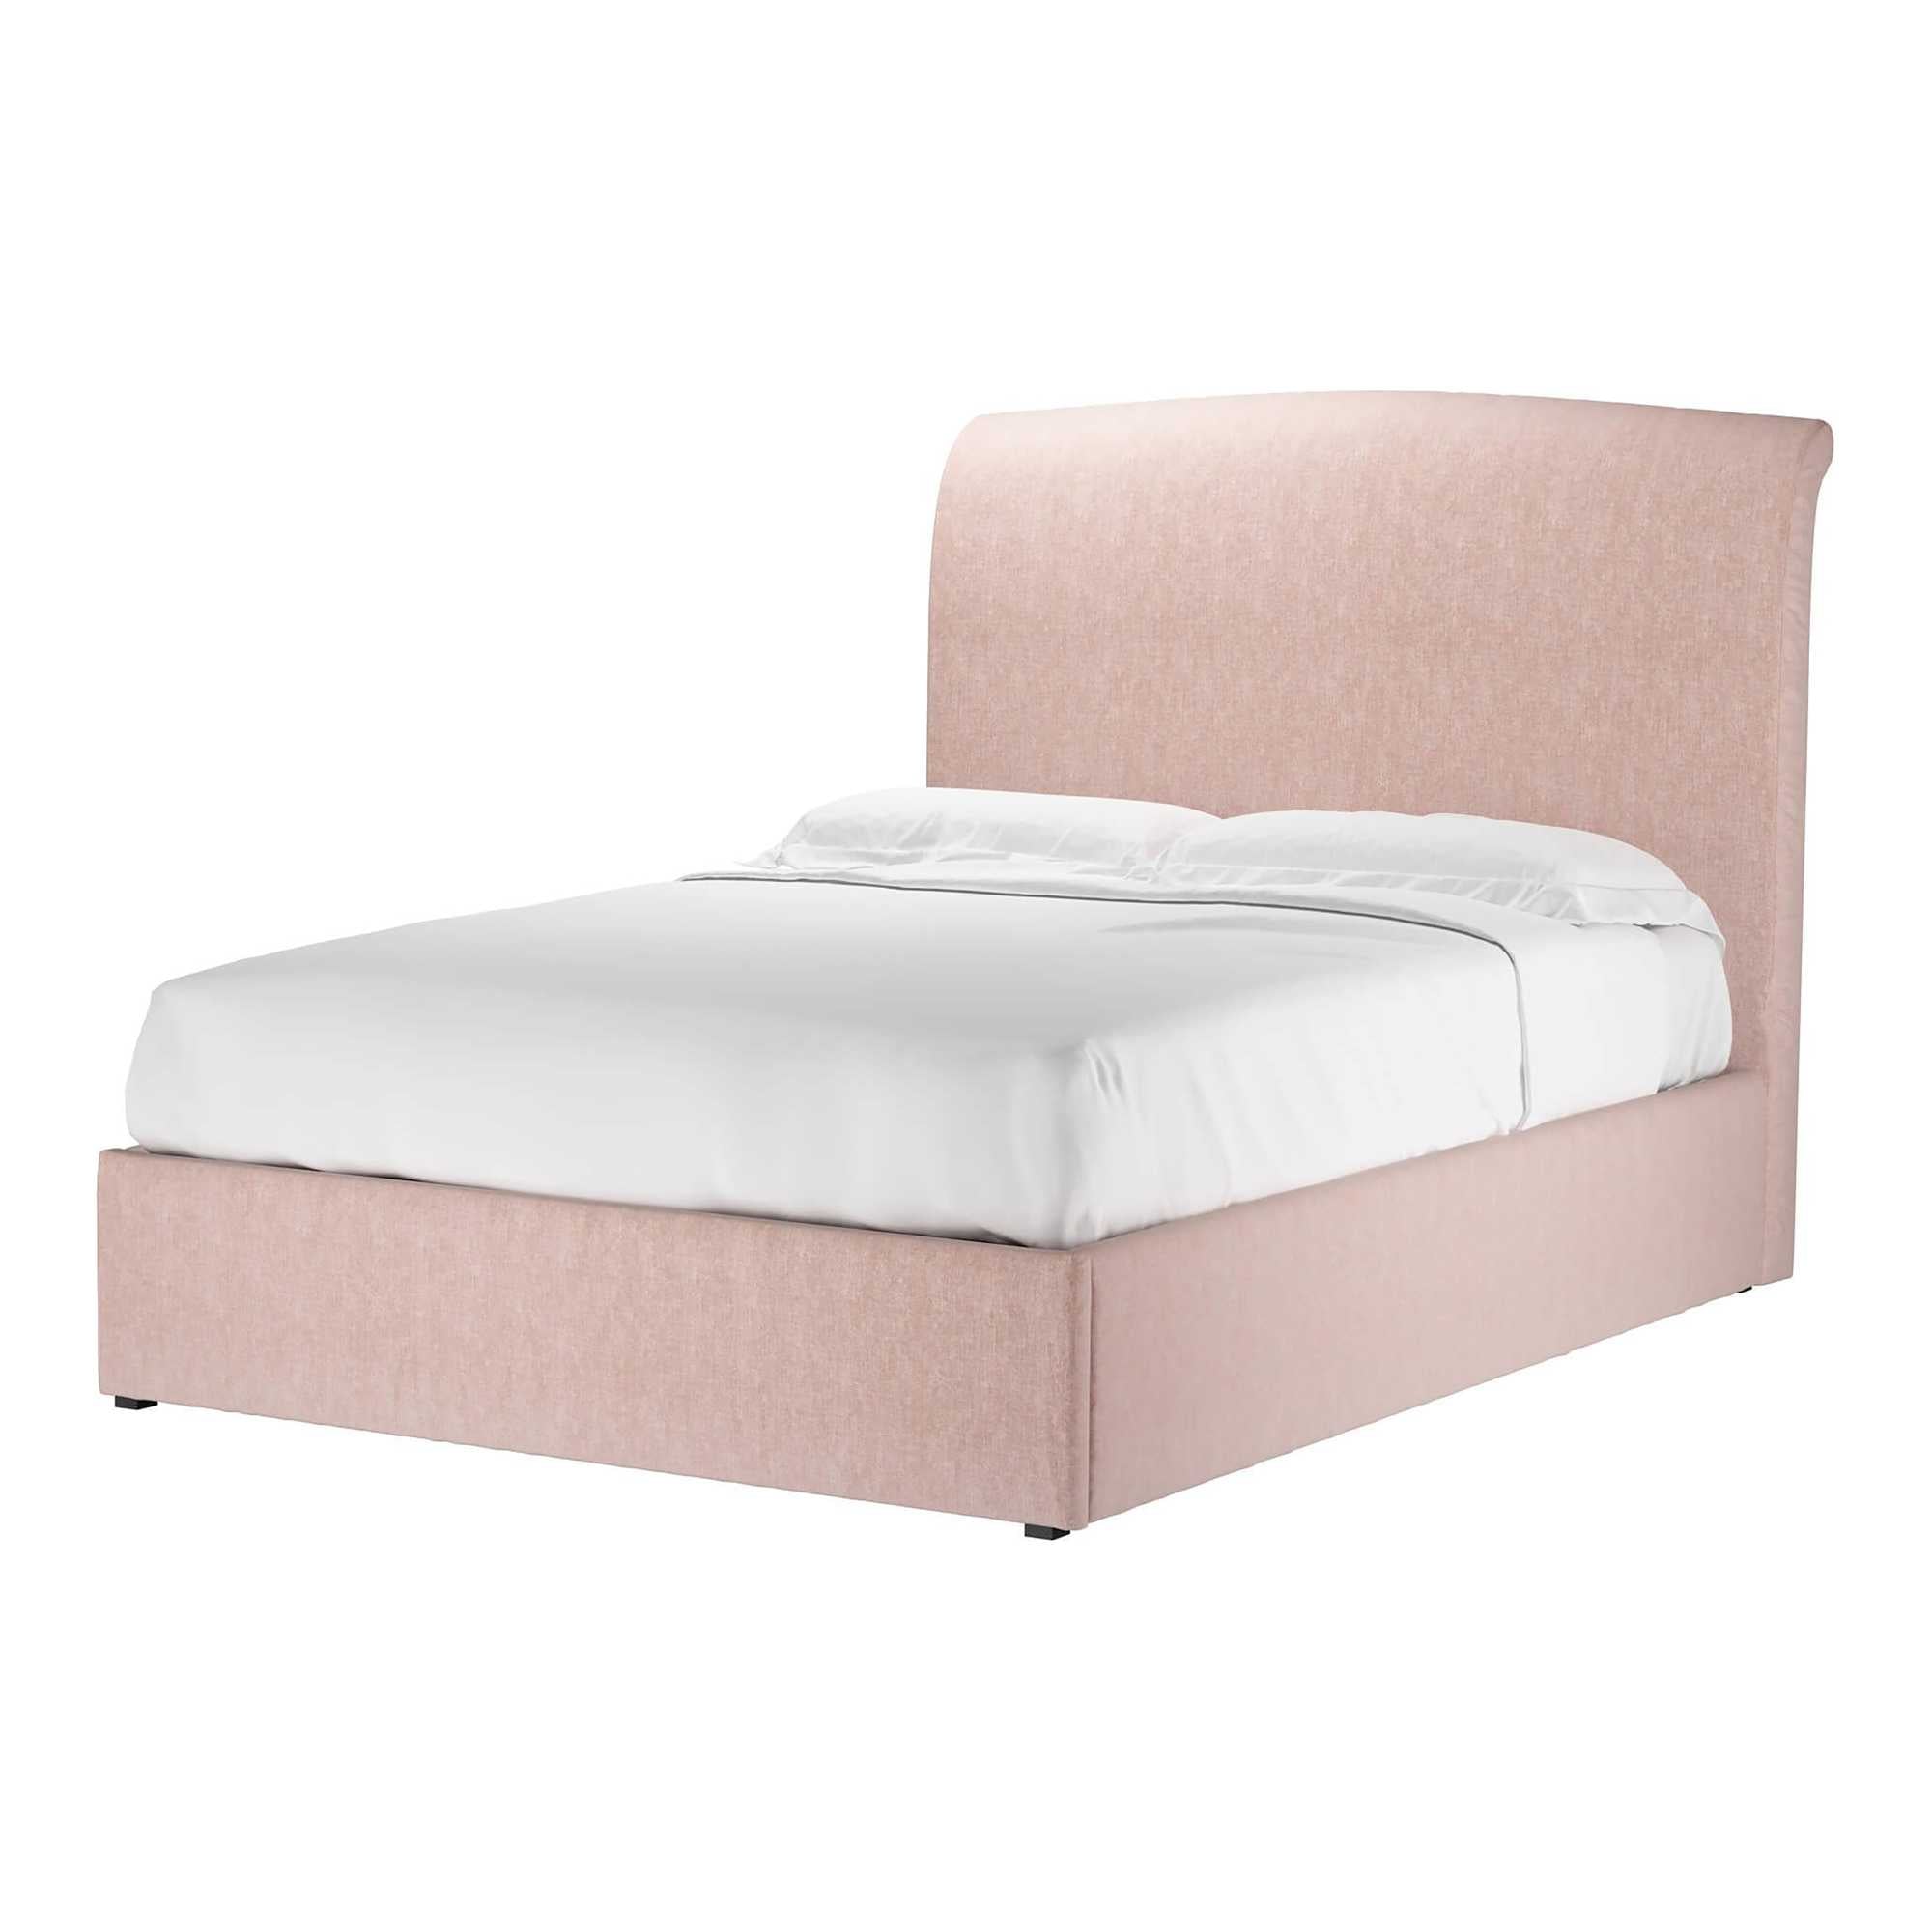 Thea Pavilion Pink Brushstroke Ottoman Bed - Double Size